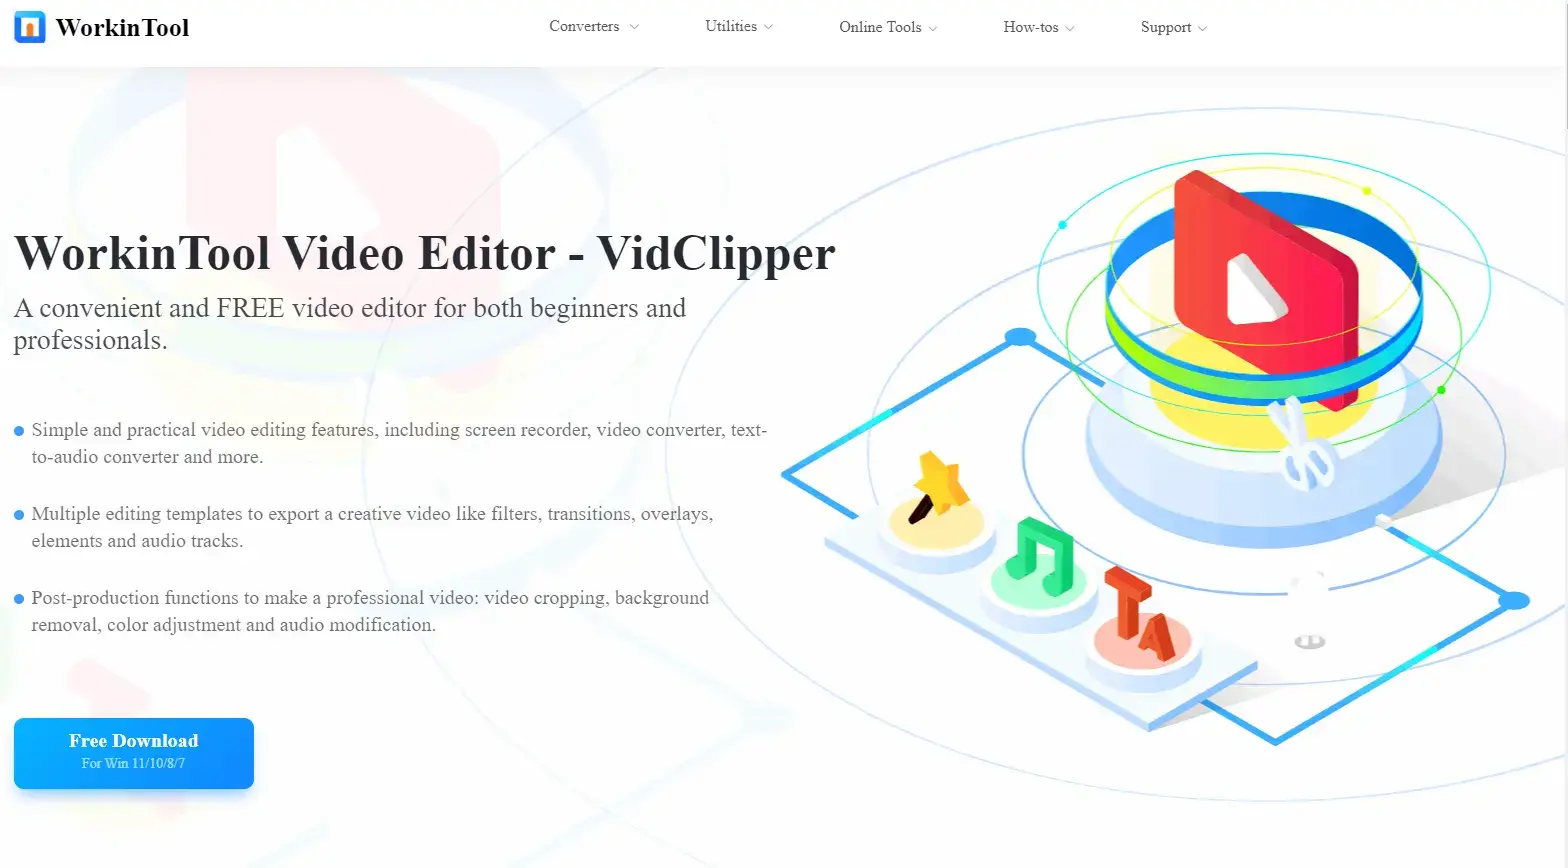 workintool vidclipper landing page